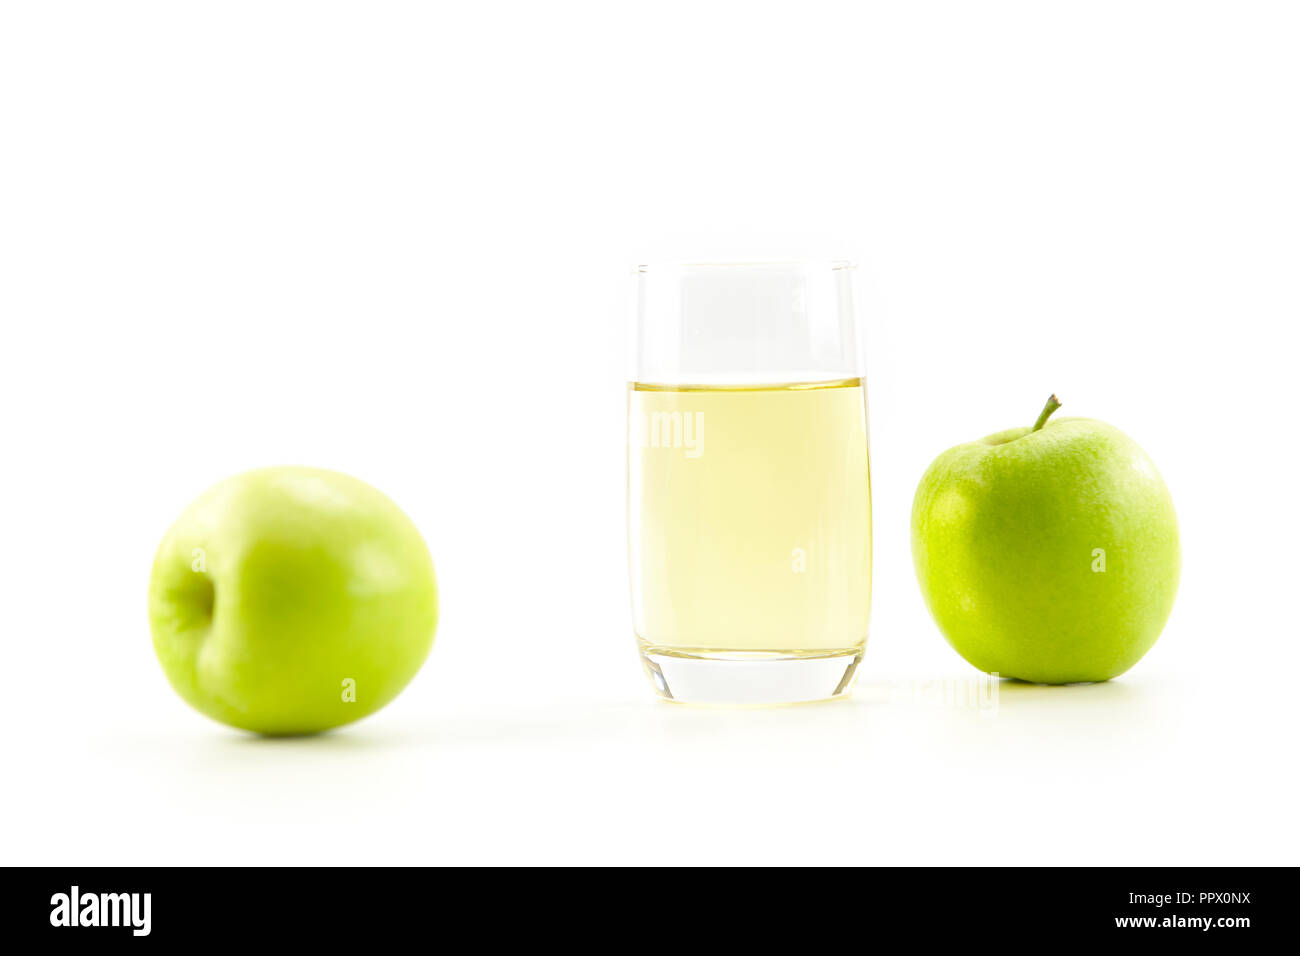 two green apples and a glass of apple juice isolated on white background. Stock Photo